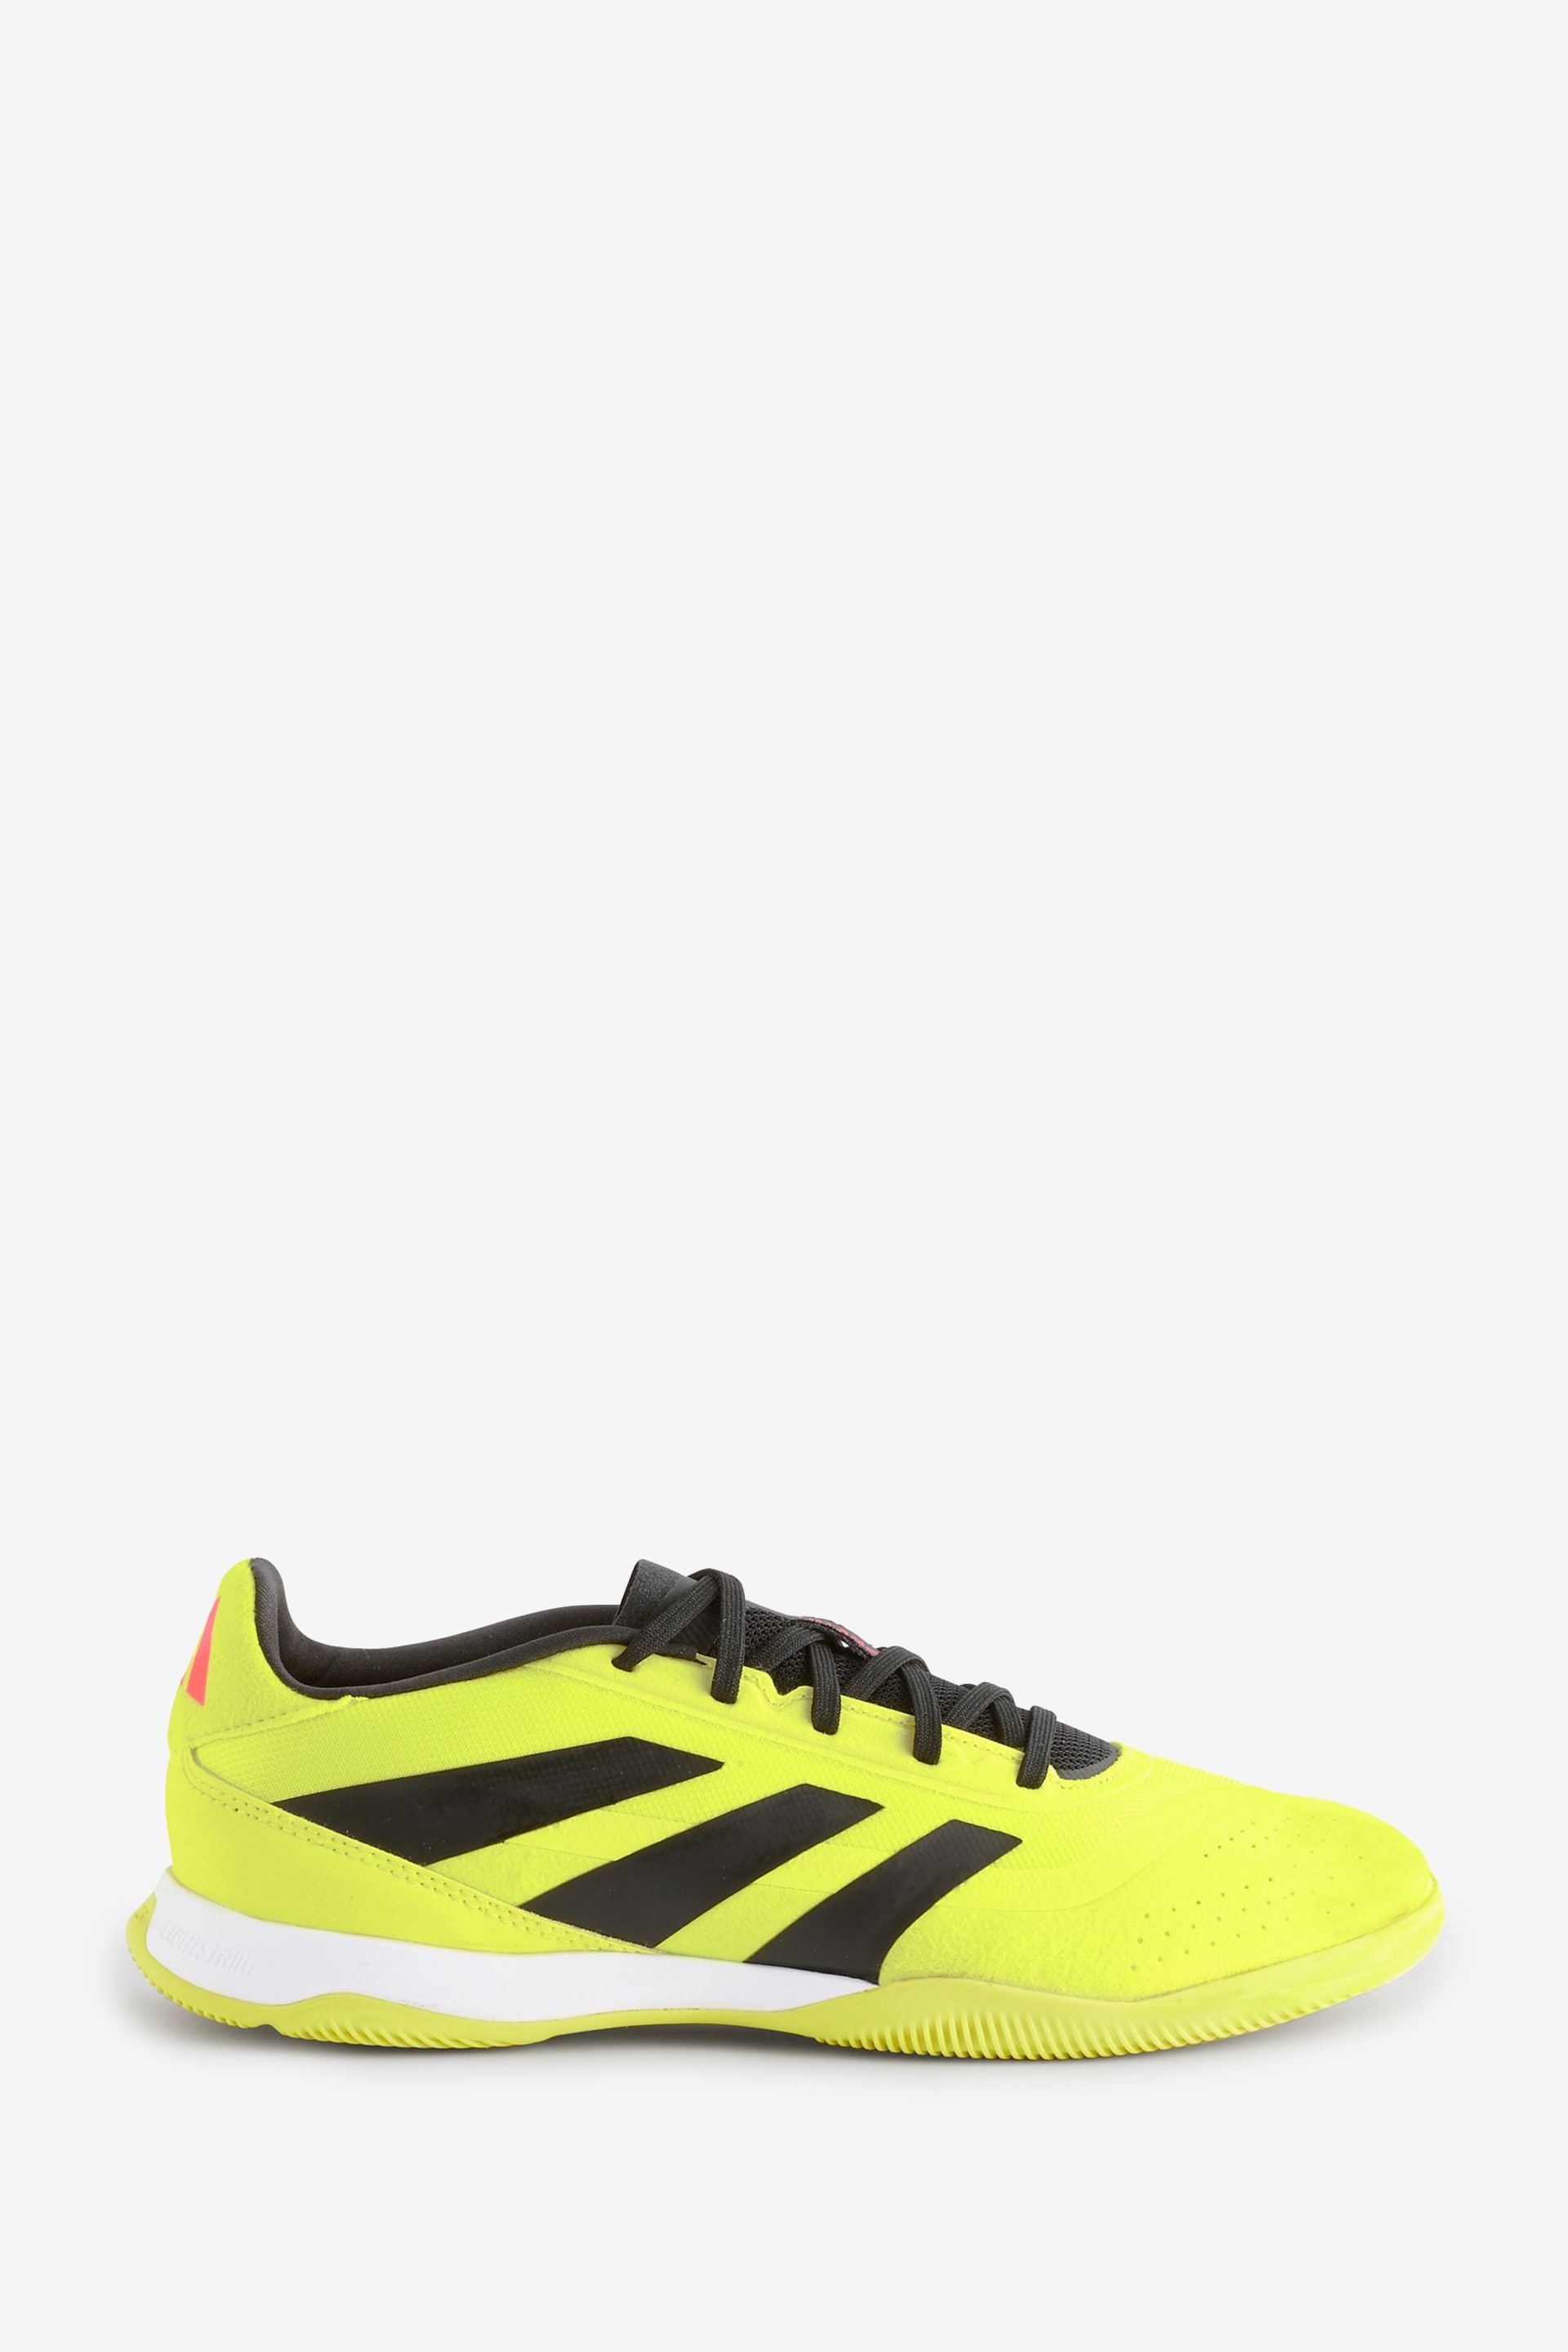 adidas Yellow Football Predator 24 League Low Indoor Adult Boots - Image 1 of 1